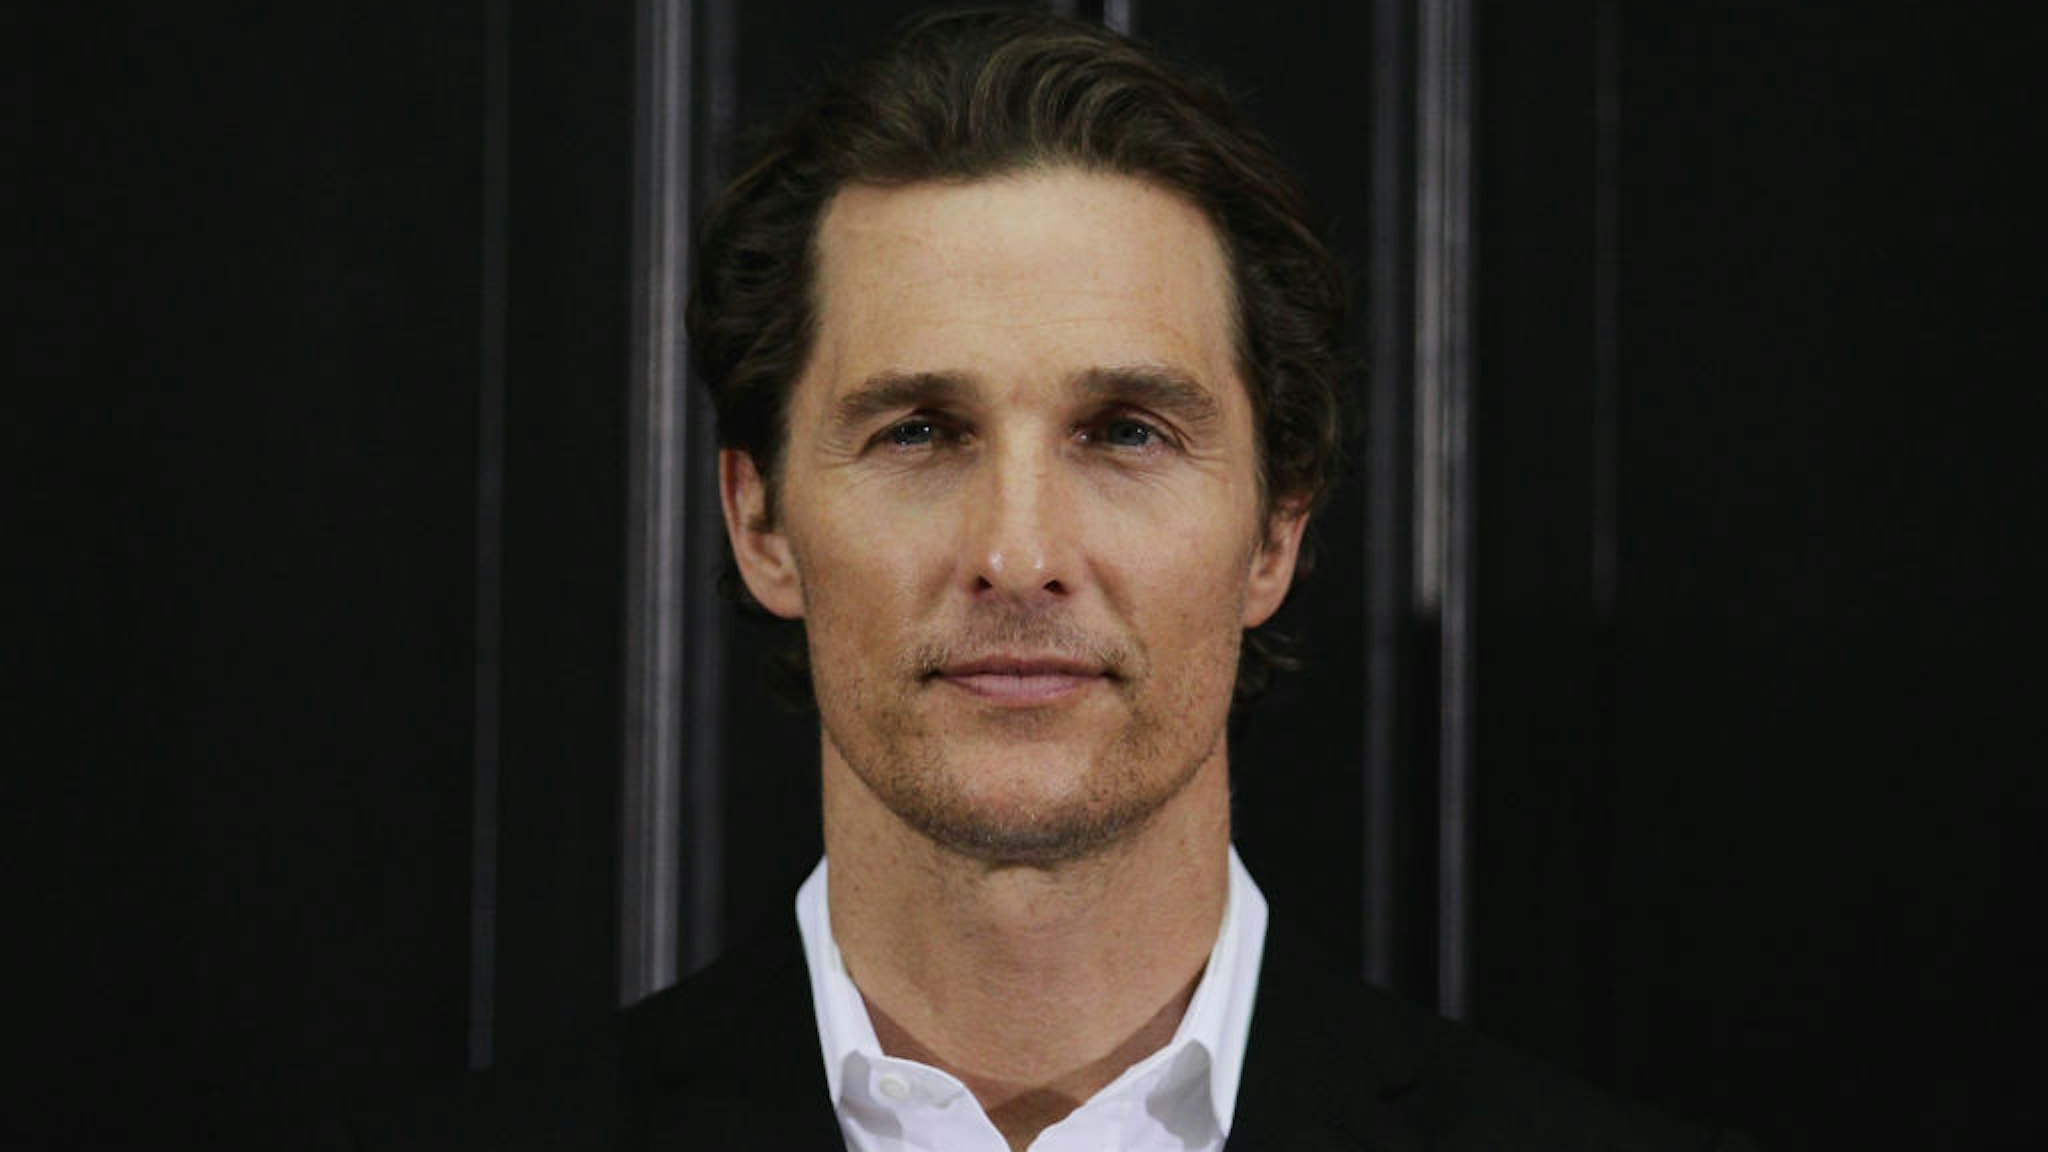 BERLIN, GERMANY - APRIL 06: Actor Matthew McConaughey attends 'Der Mandant' (The Lincoln Lawyer) - Berlin photocall at Hotel de Rome on April 6, 2011 in Berlin, Germany. (Photo by Andreas Rentz/Getty Images)